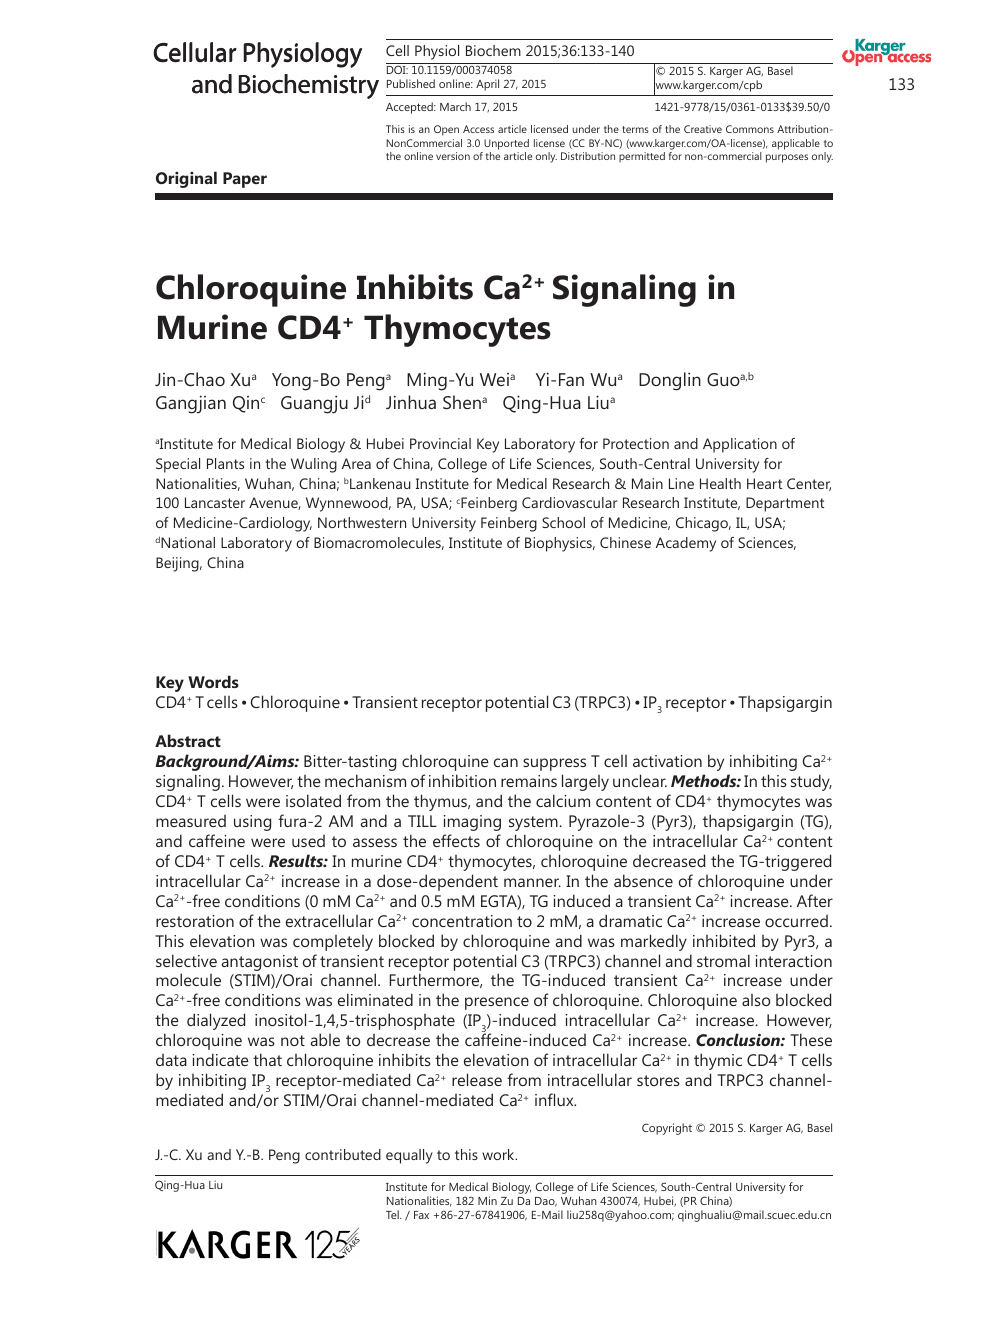 Chloroquine Inhibits Ca Sup 2 Sup Signaling In Murine Cd4 Sup Sup Thymocytes Topic Of Research Paper In Biological Sciences Download Scholarly Article Pdf And Read For Free On Cyberleninka Open Science Hub